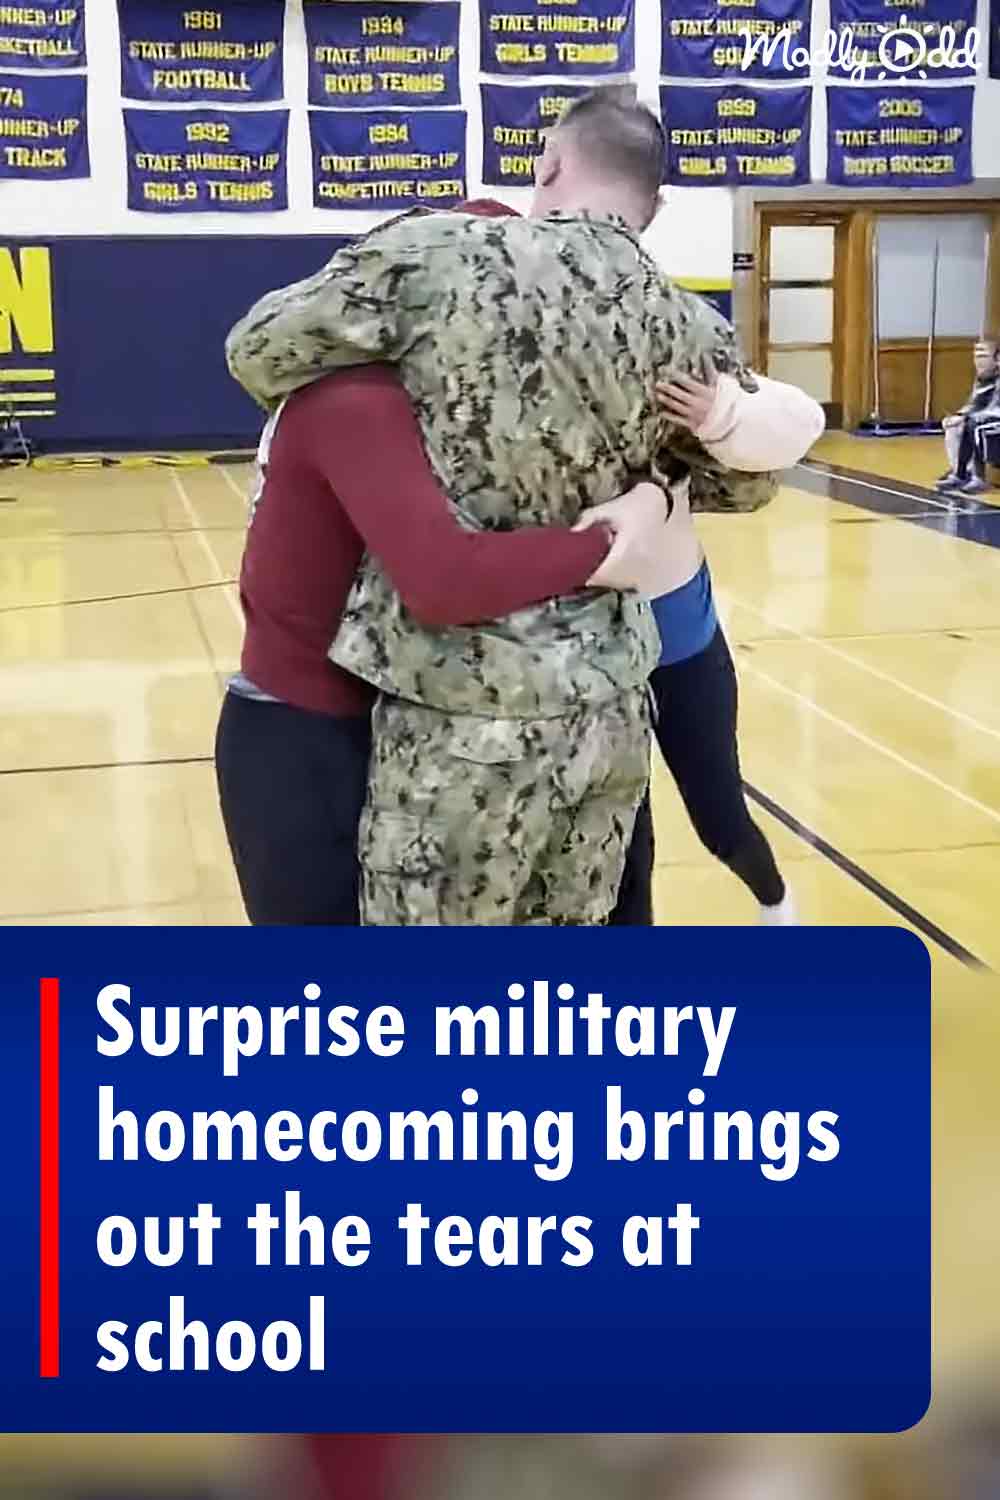 Surprise military homecoming brings out the tears at school